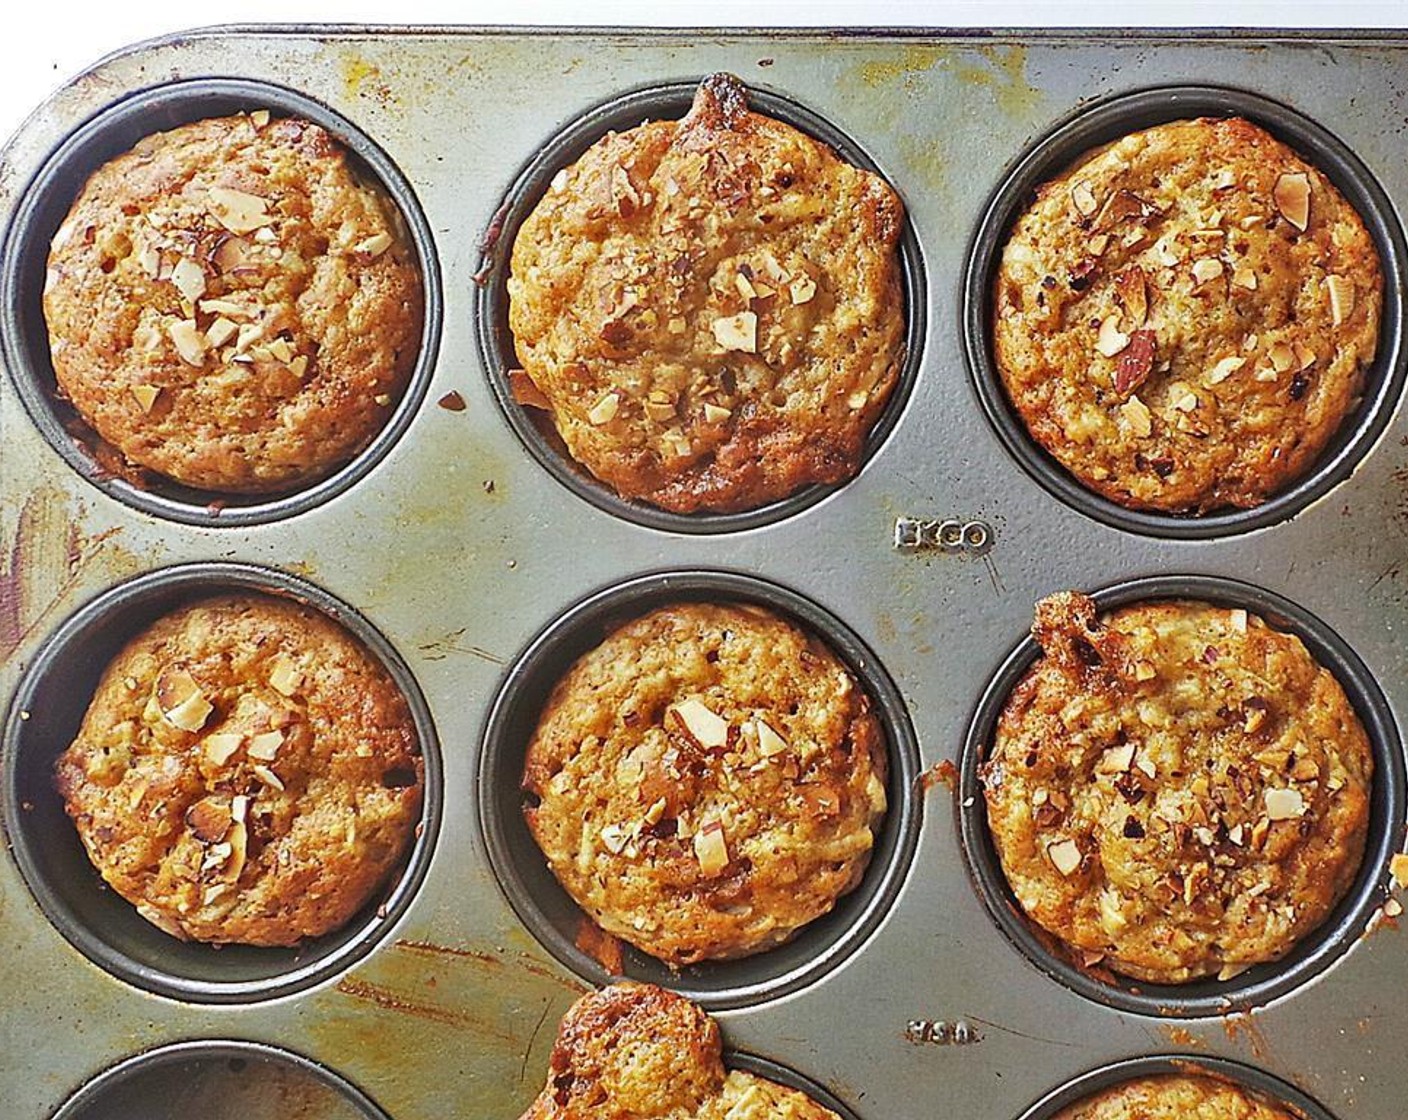 step 6 Grease a 12-tin muffin pan with Coconut Oil Cooking Spray (as needed) or line with muffin liners. Fill each tin 3/4 way full of batter. Evenly sprinkle the almonds on top of the muffins.